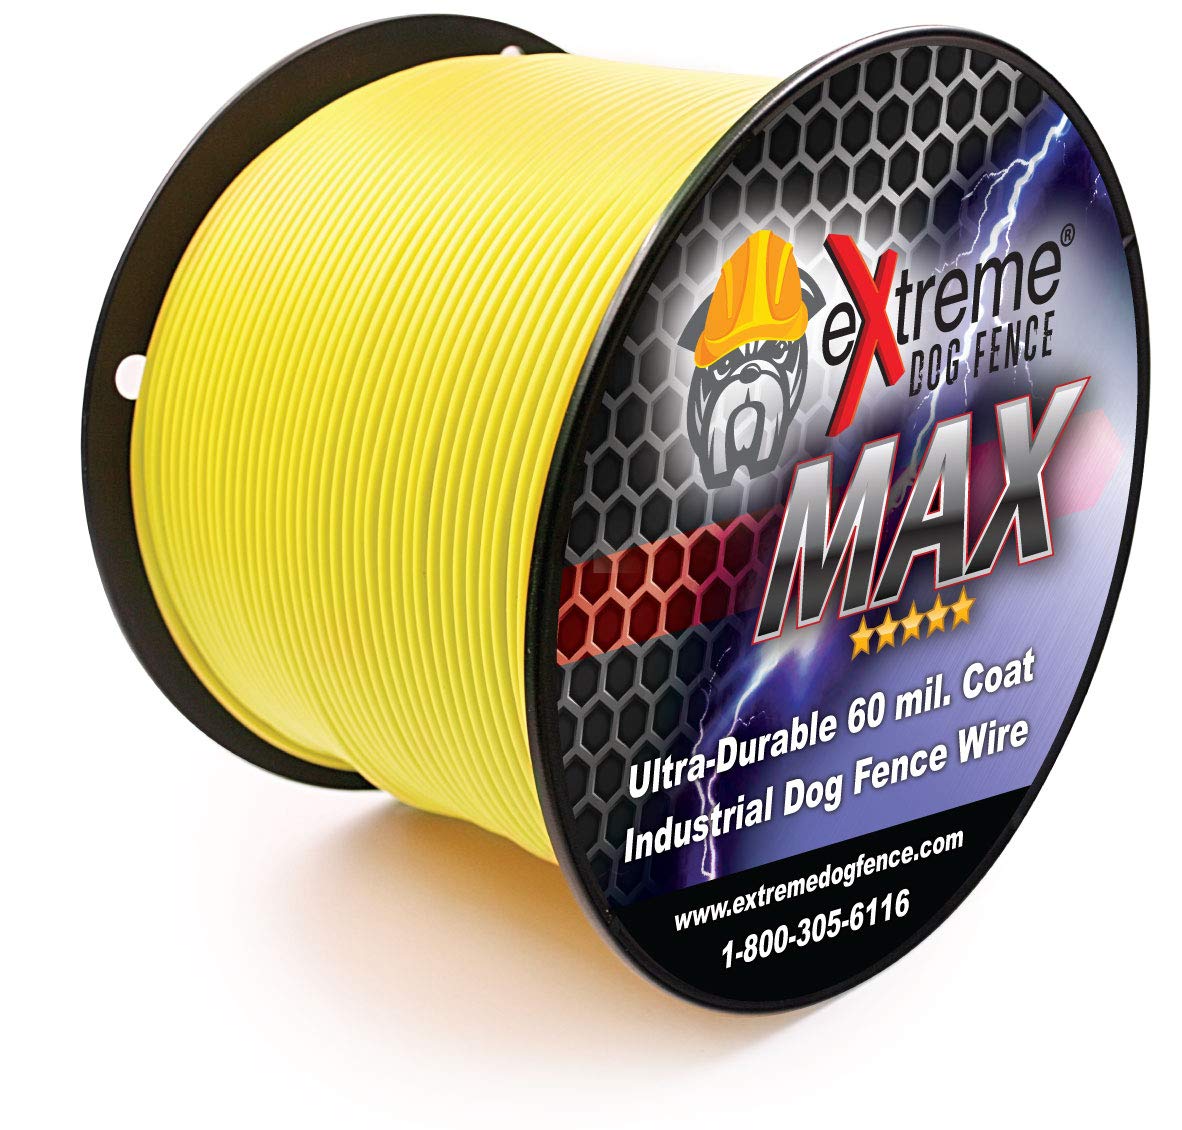 Yellow Maximum Performance Dog Fence Wire - 1000 Ft. 14 Gauge Wire with Ultra Thick 60 Mil Polyethylene Protective Jacket - Designed for Max Life Reliability and Low Signal Loss - Universal Compatible